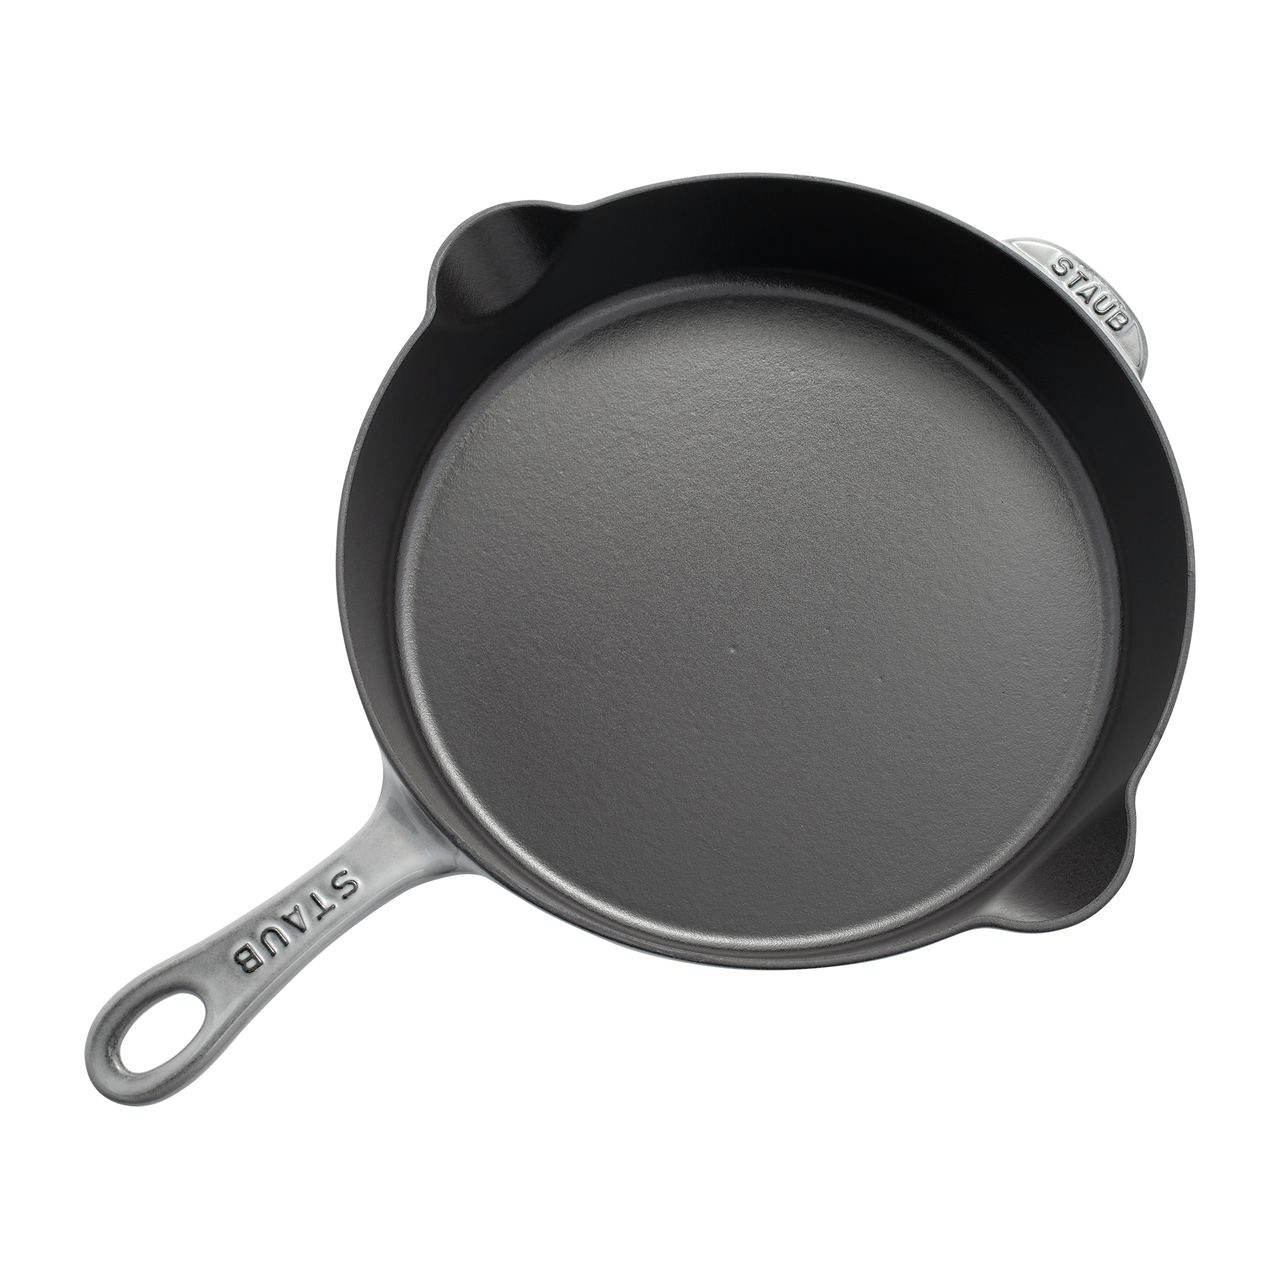 https://www.zwilling.com/on/demandware.static/-/Sites-zwilling-us-Library/default/dw457c292a/images/product-content/product-specific-images/staub-pdp-hotspot-modules/staub-traditional-skillet-graphite.png